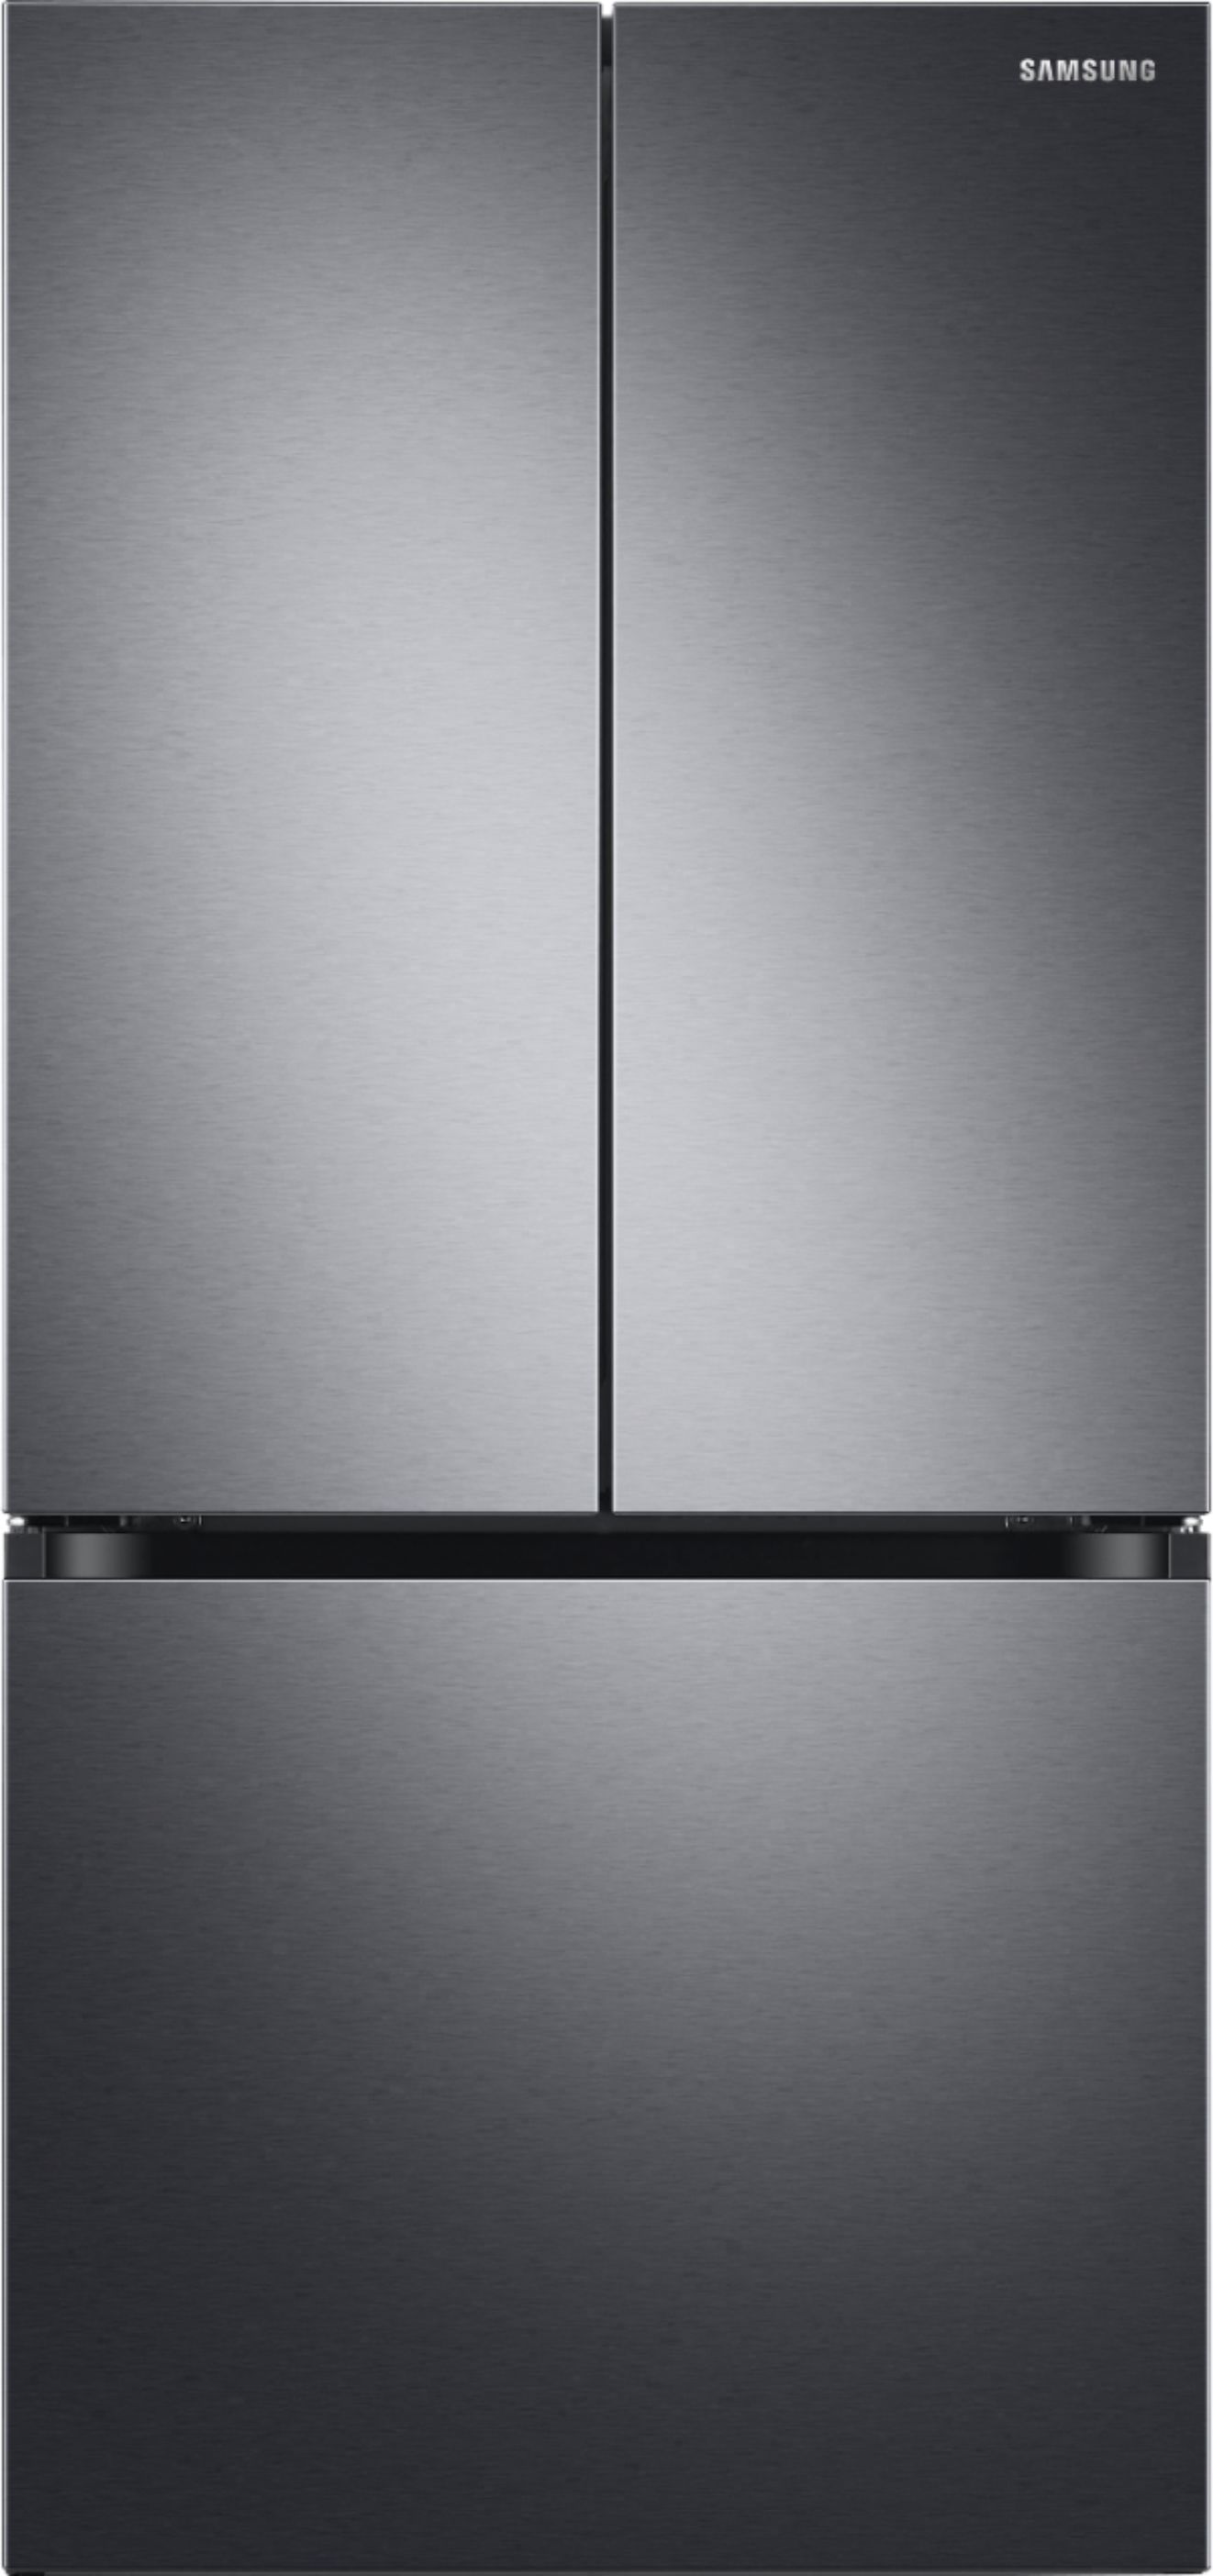 Samsung RF20A5101SG 32 Inch Freestanding Smart French Door Refrigerator  with 19.5 cu. ft. Capacity, 3 Shelves, Gallon Bins, Twin Cooling+, Ice  Maker, ADA Compliant, and ENERGY STAR: Fingerprint Resistant Black  Stainless Steel